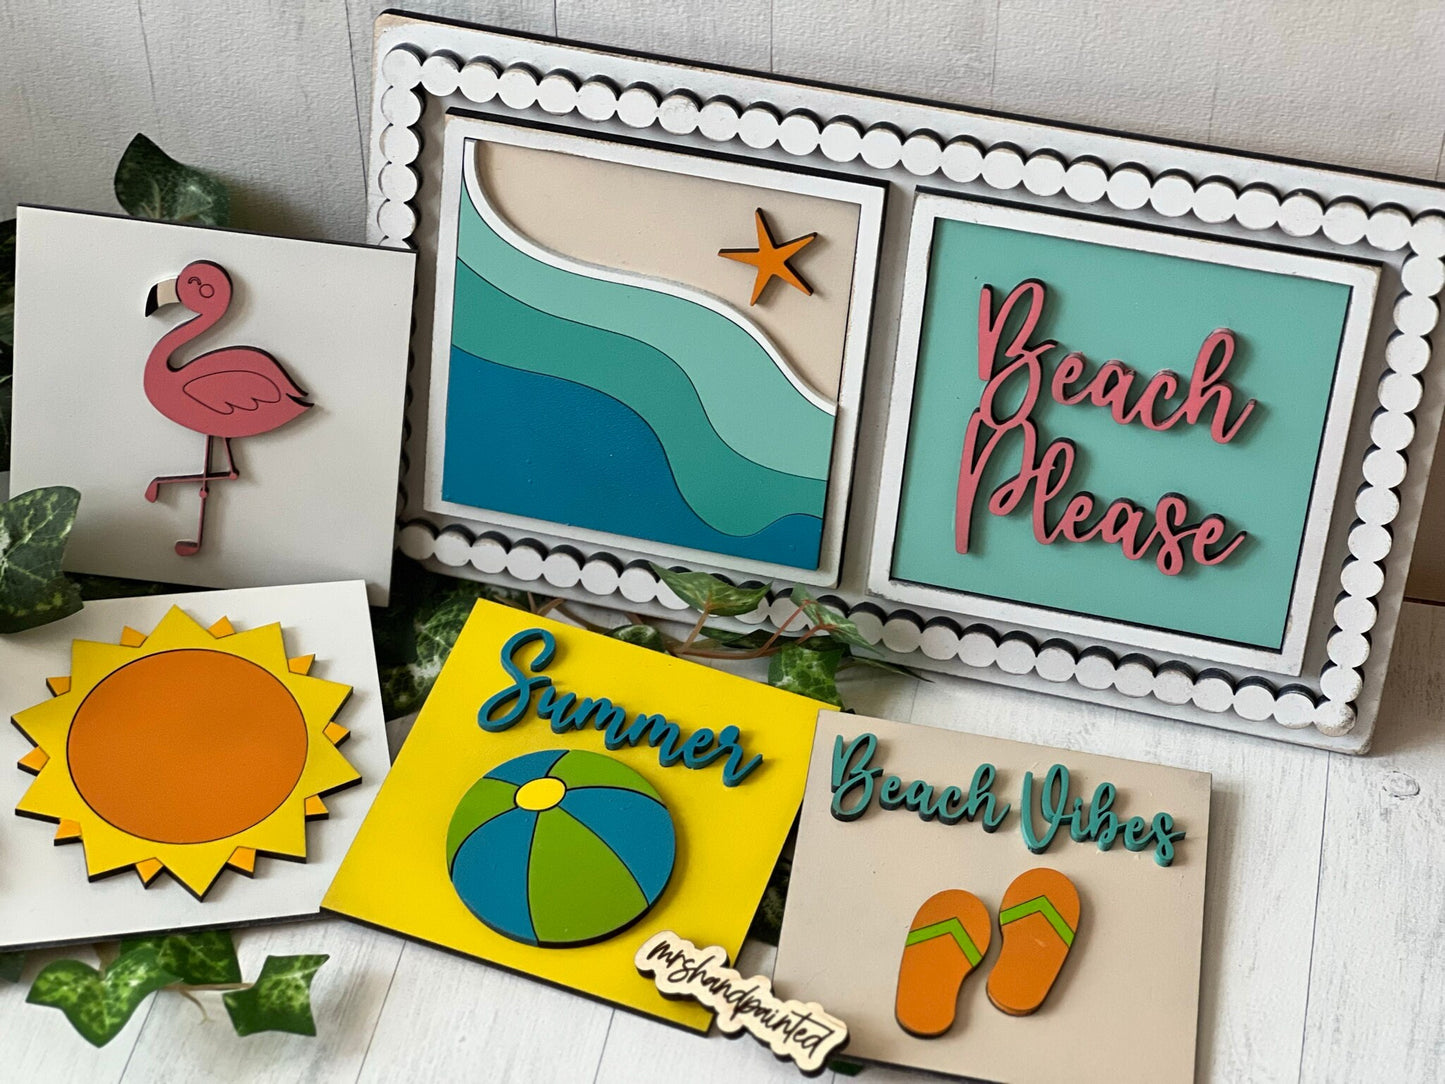 Beach Vibes / Summer Leaning Ladder Interchangeable Signs - Laser Cut Wood Painted